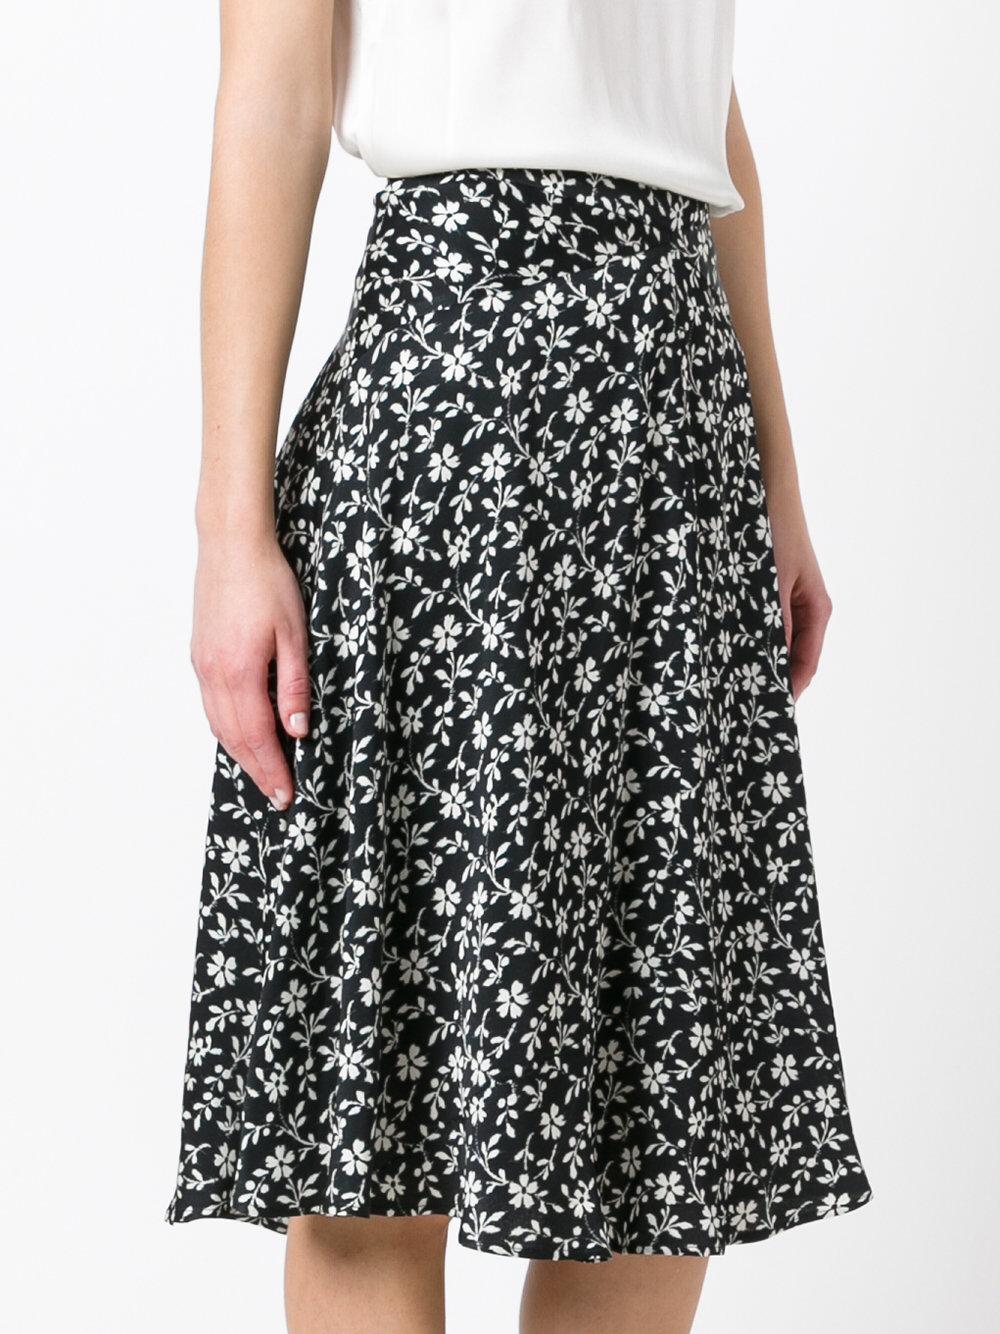 Lyst - Etro Floral Print Pleated Skirt in Black